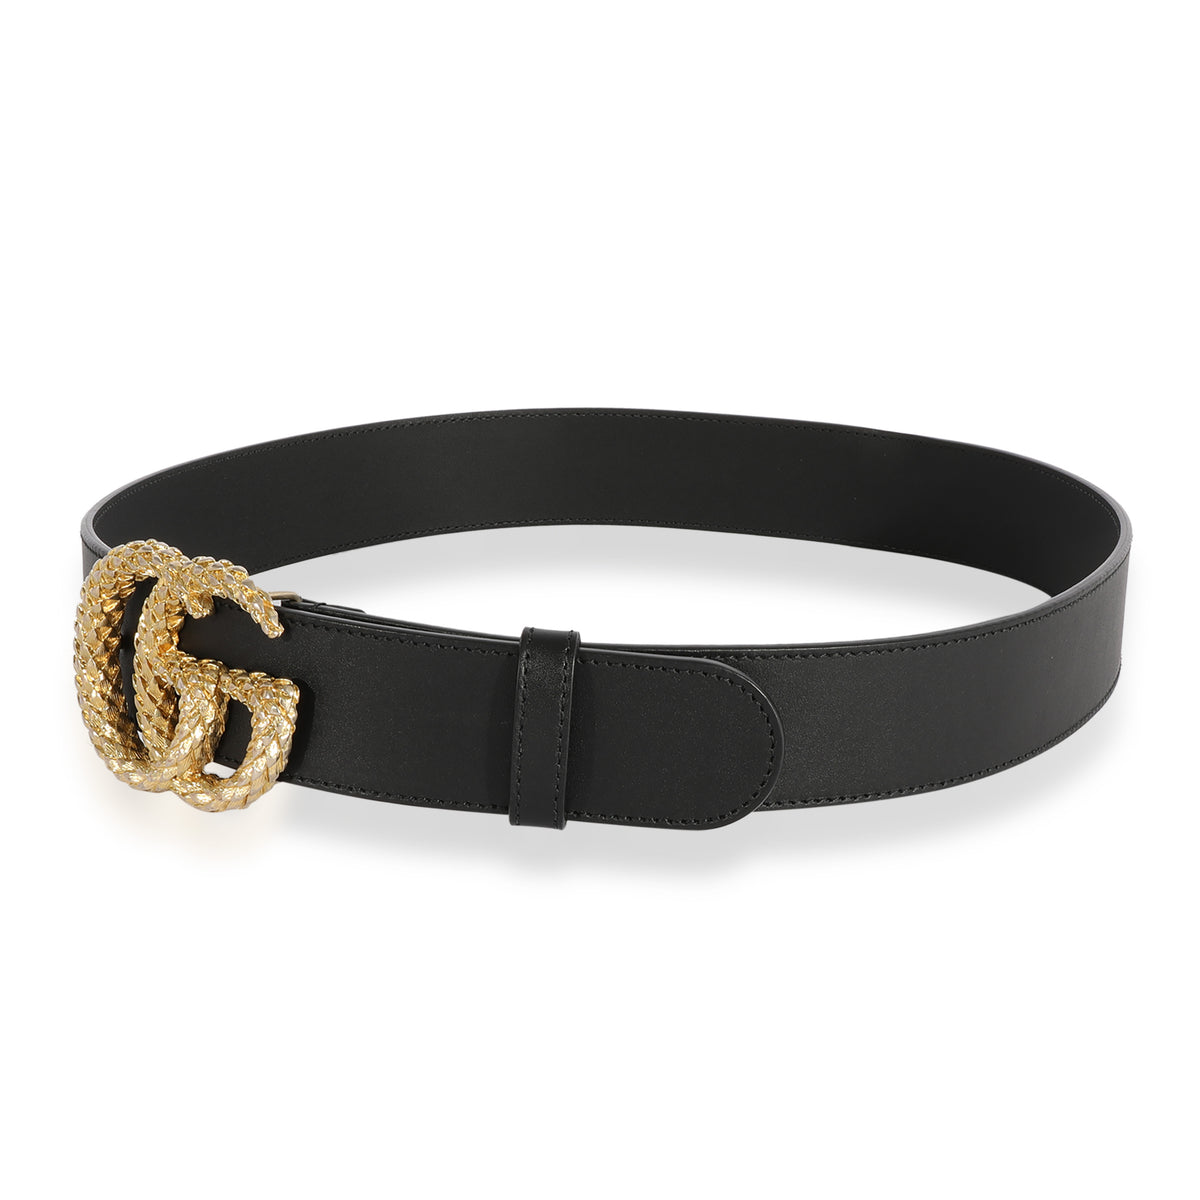 Gucci Double G Gold Buckle Textured Leather Belt 1.5 Width Black